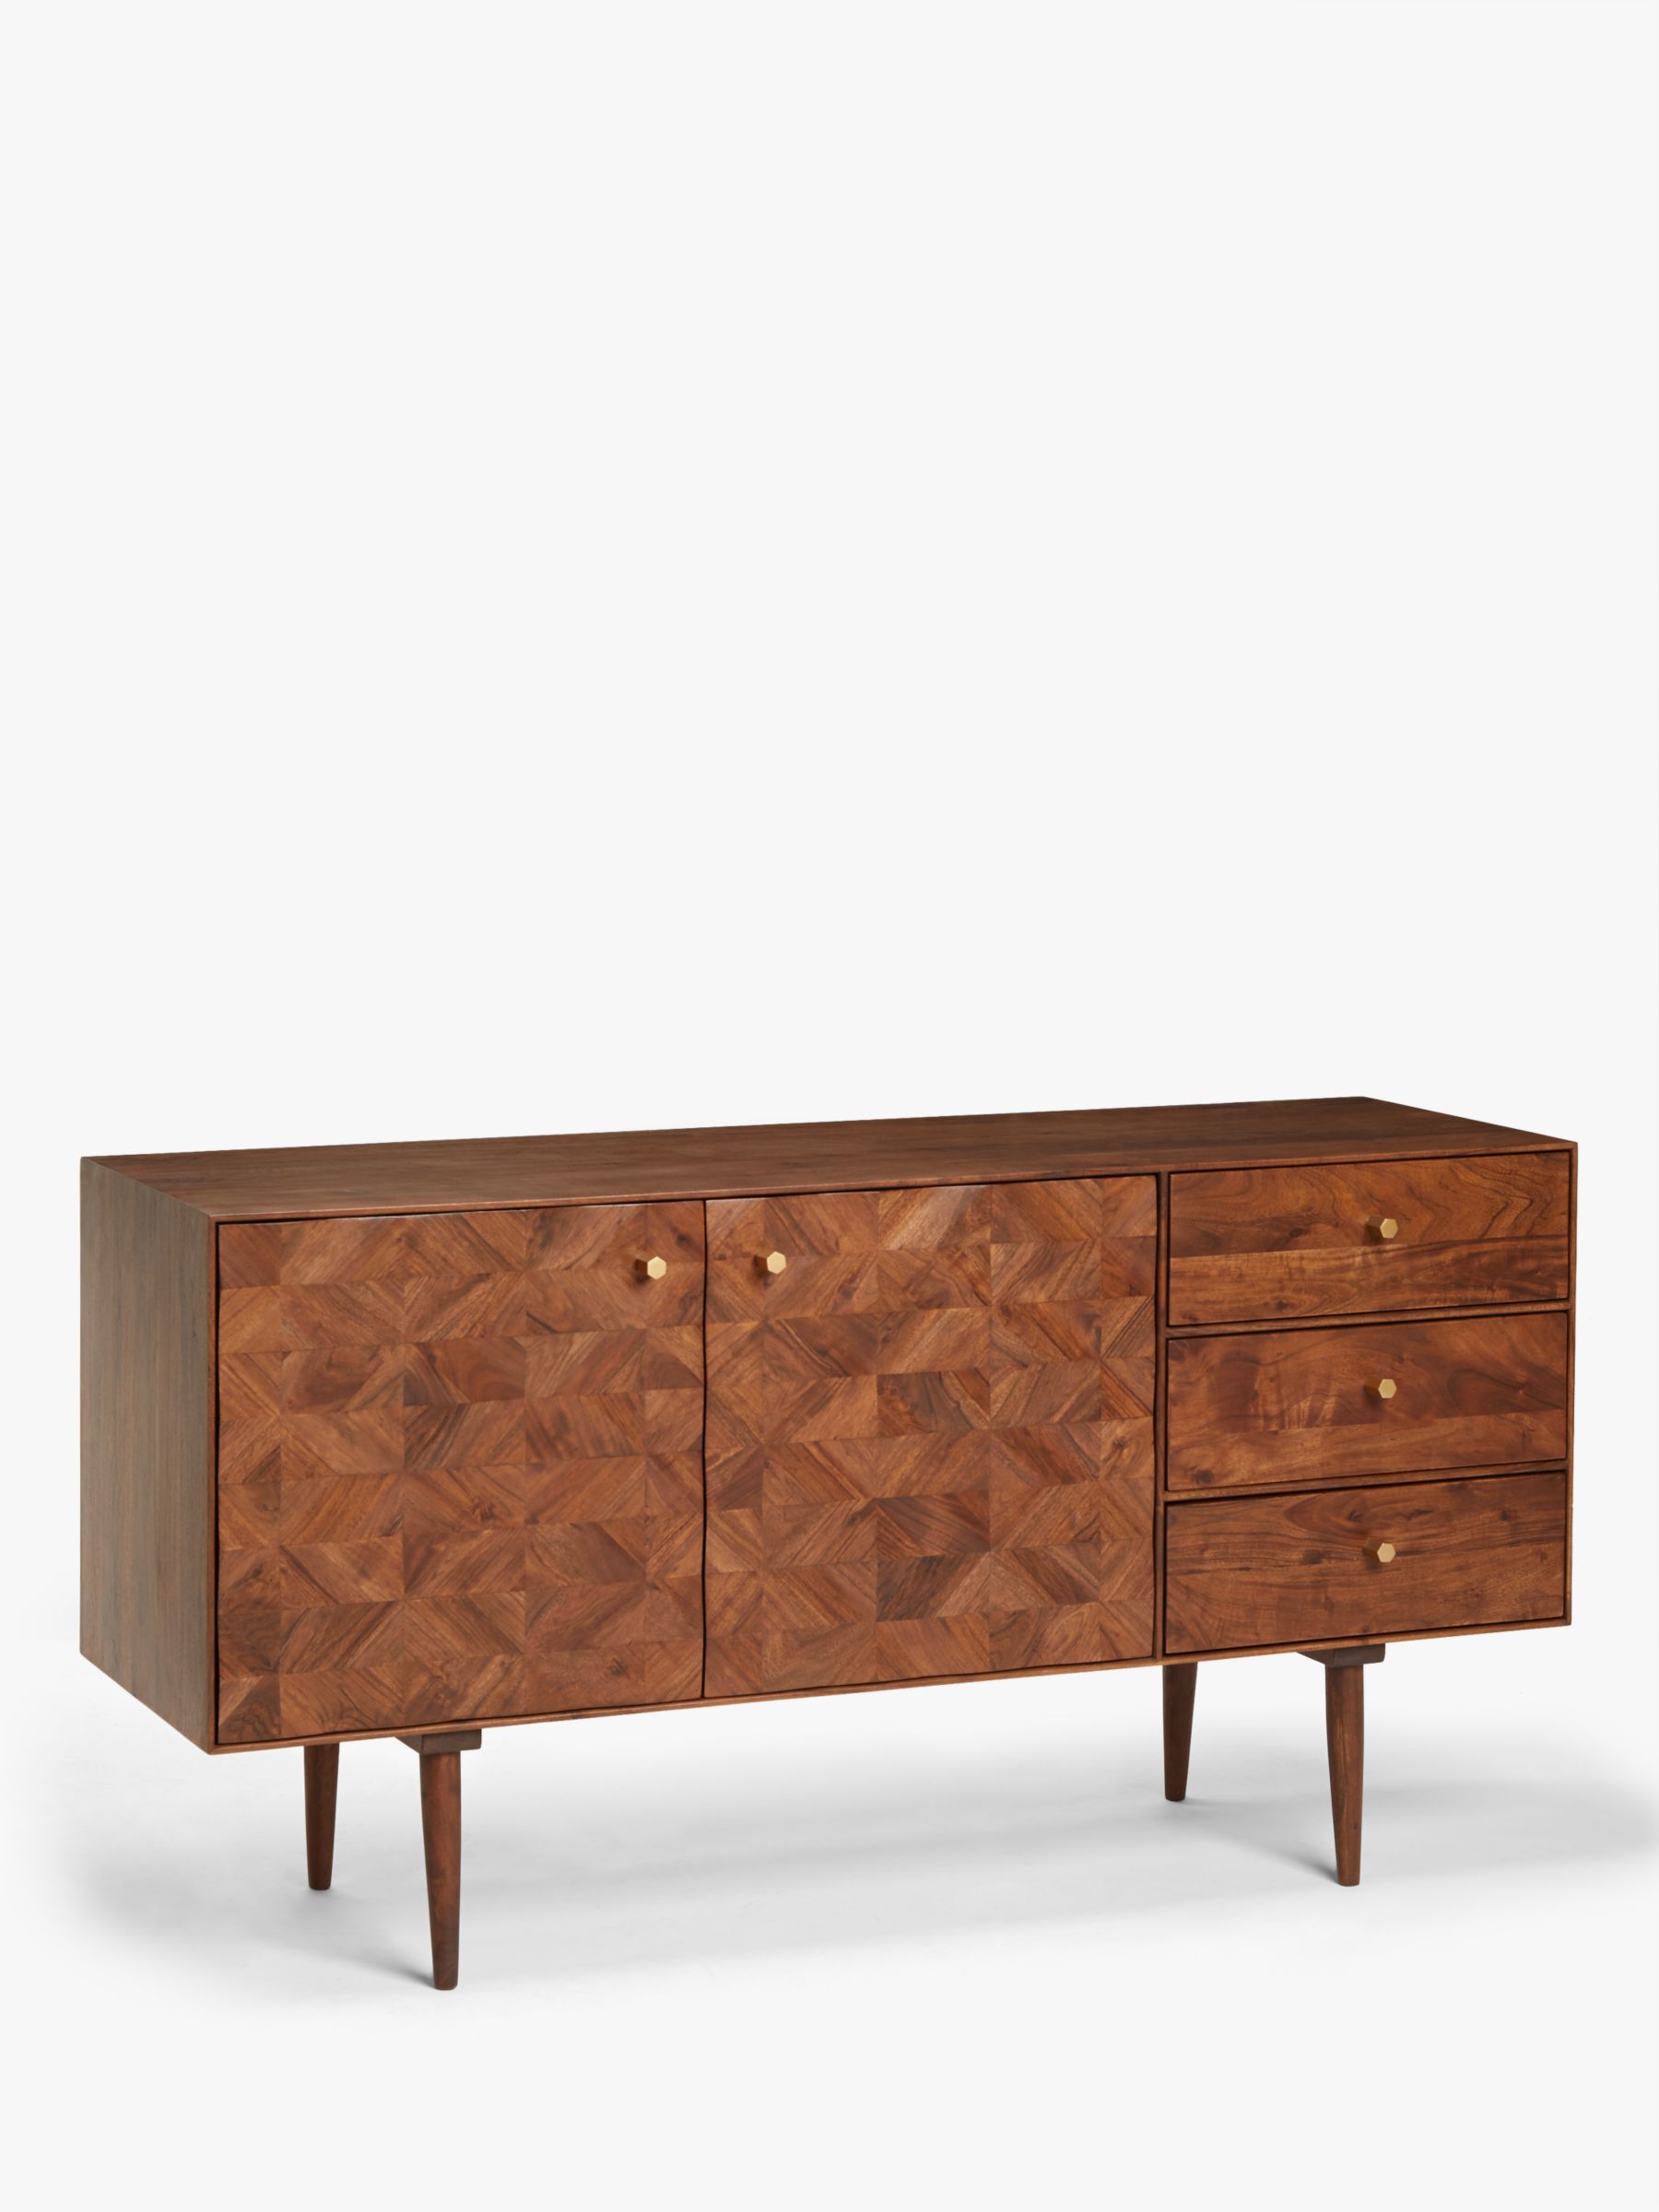 Photo of John lewis + swoon franklin tv stand sideboard for tvs up to 55 brown